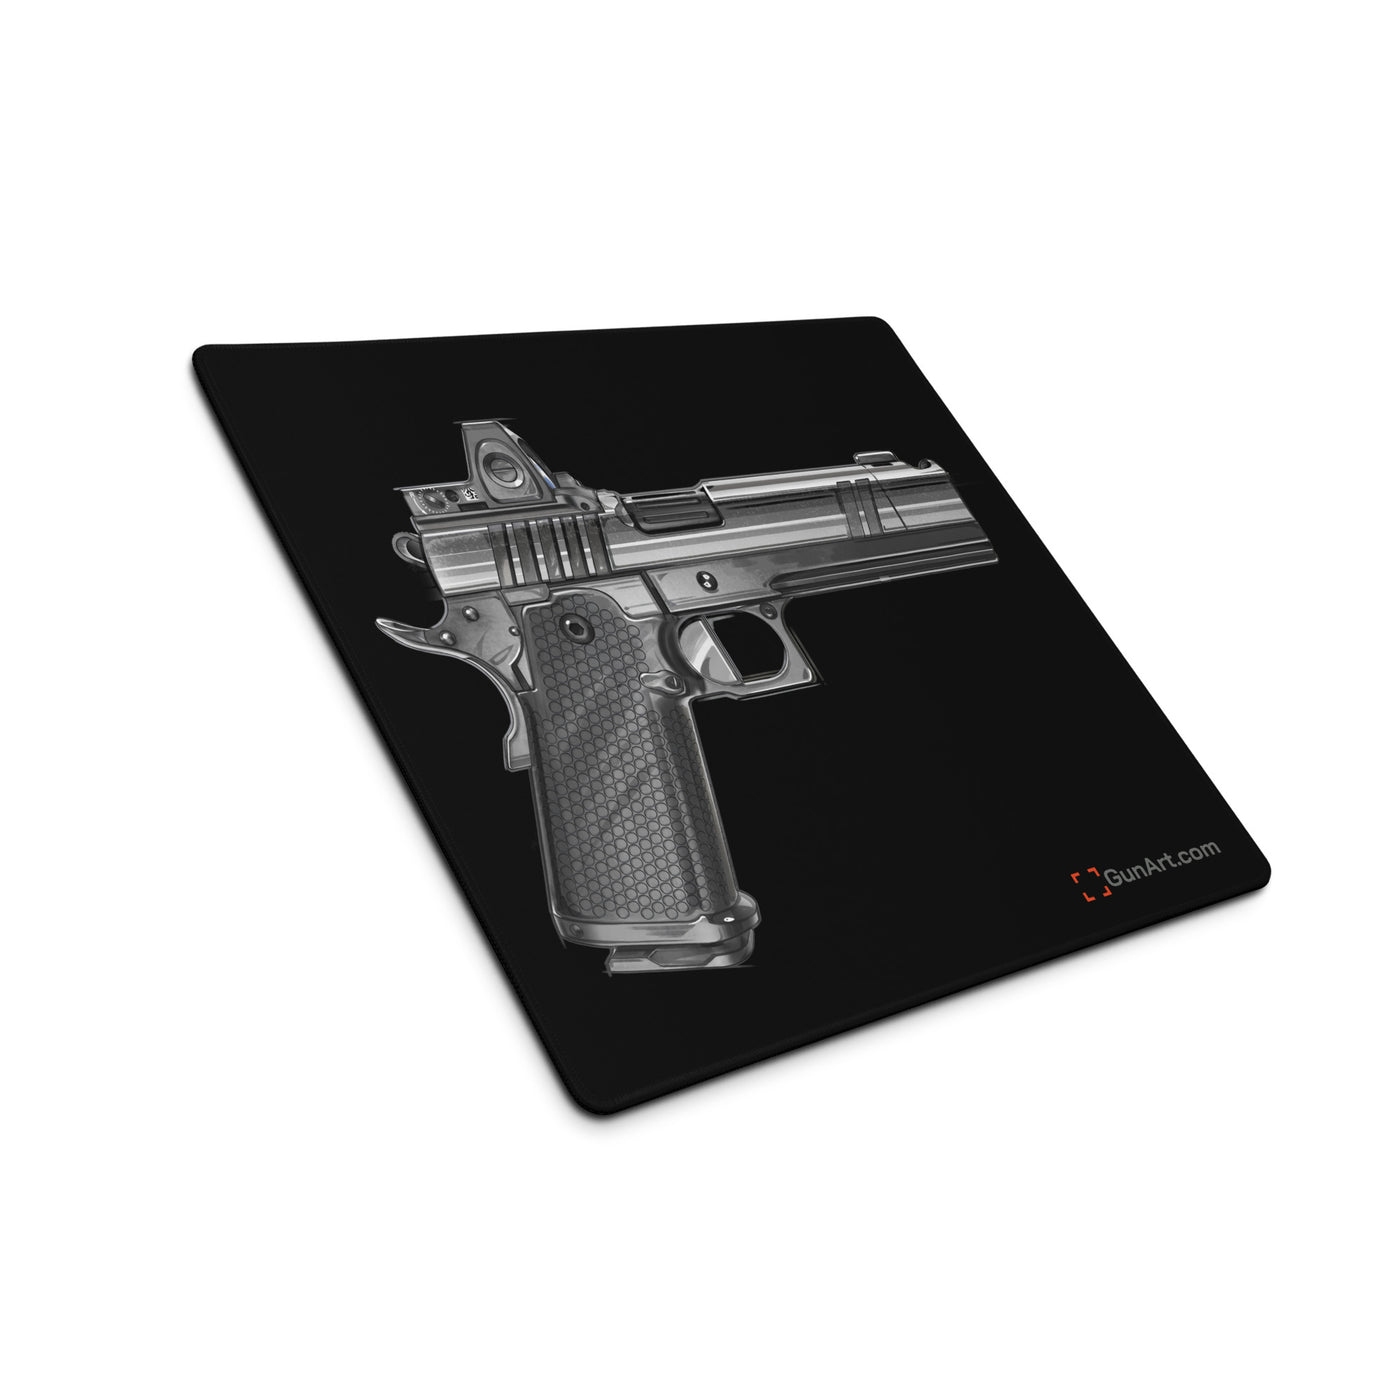 2011 Black & White Gaming Mouse Pad - Just The Piece - Black Background